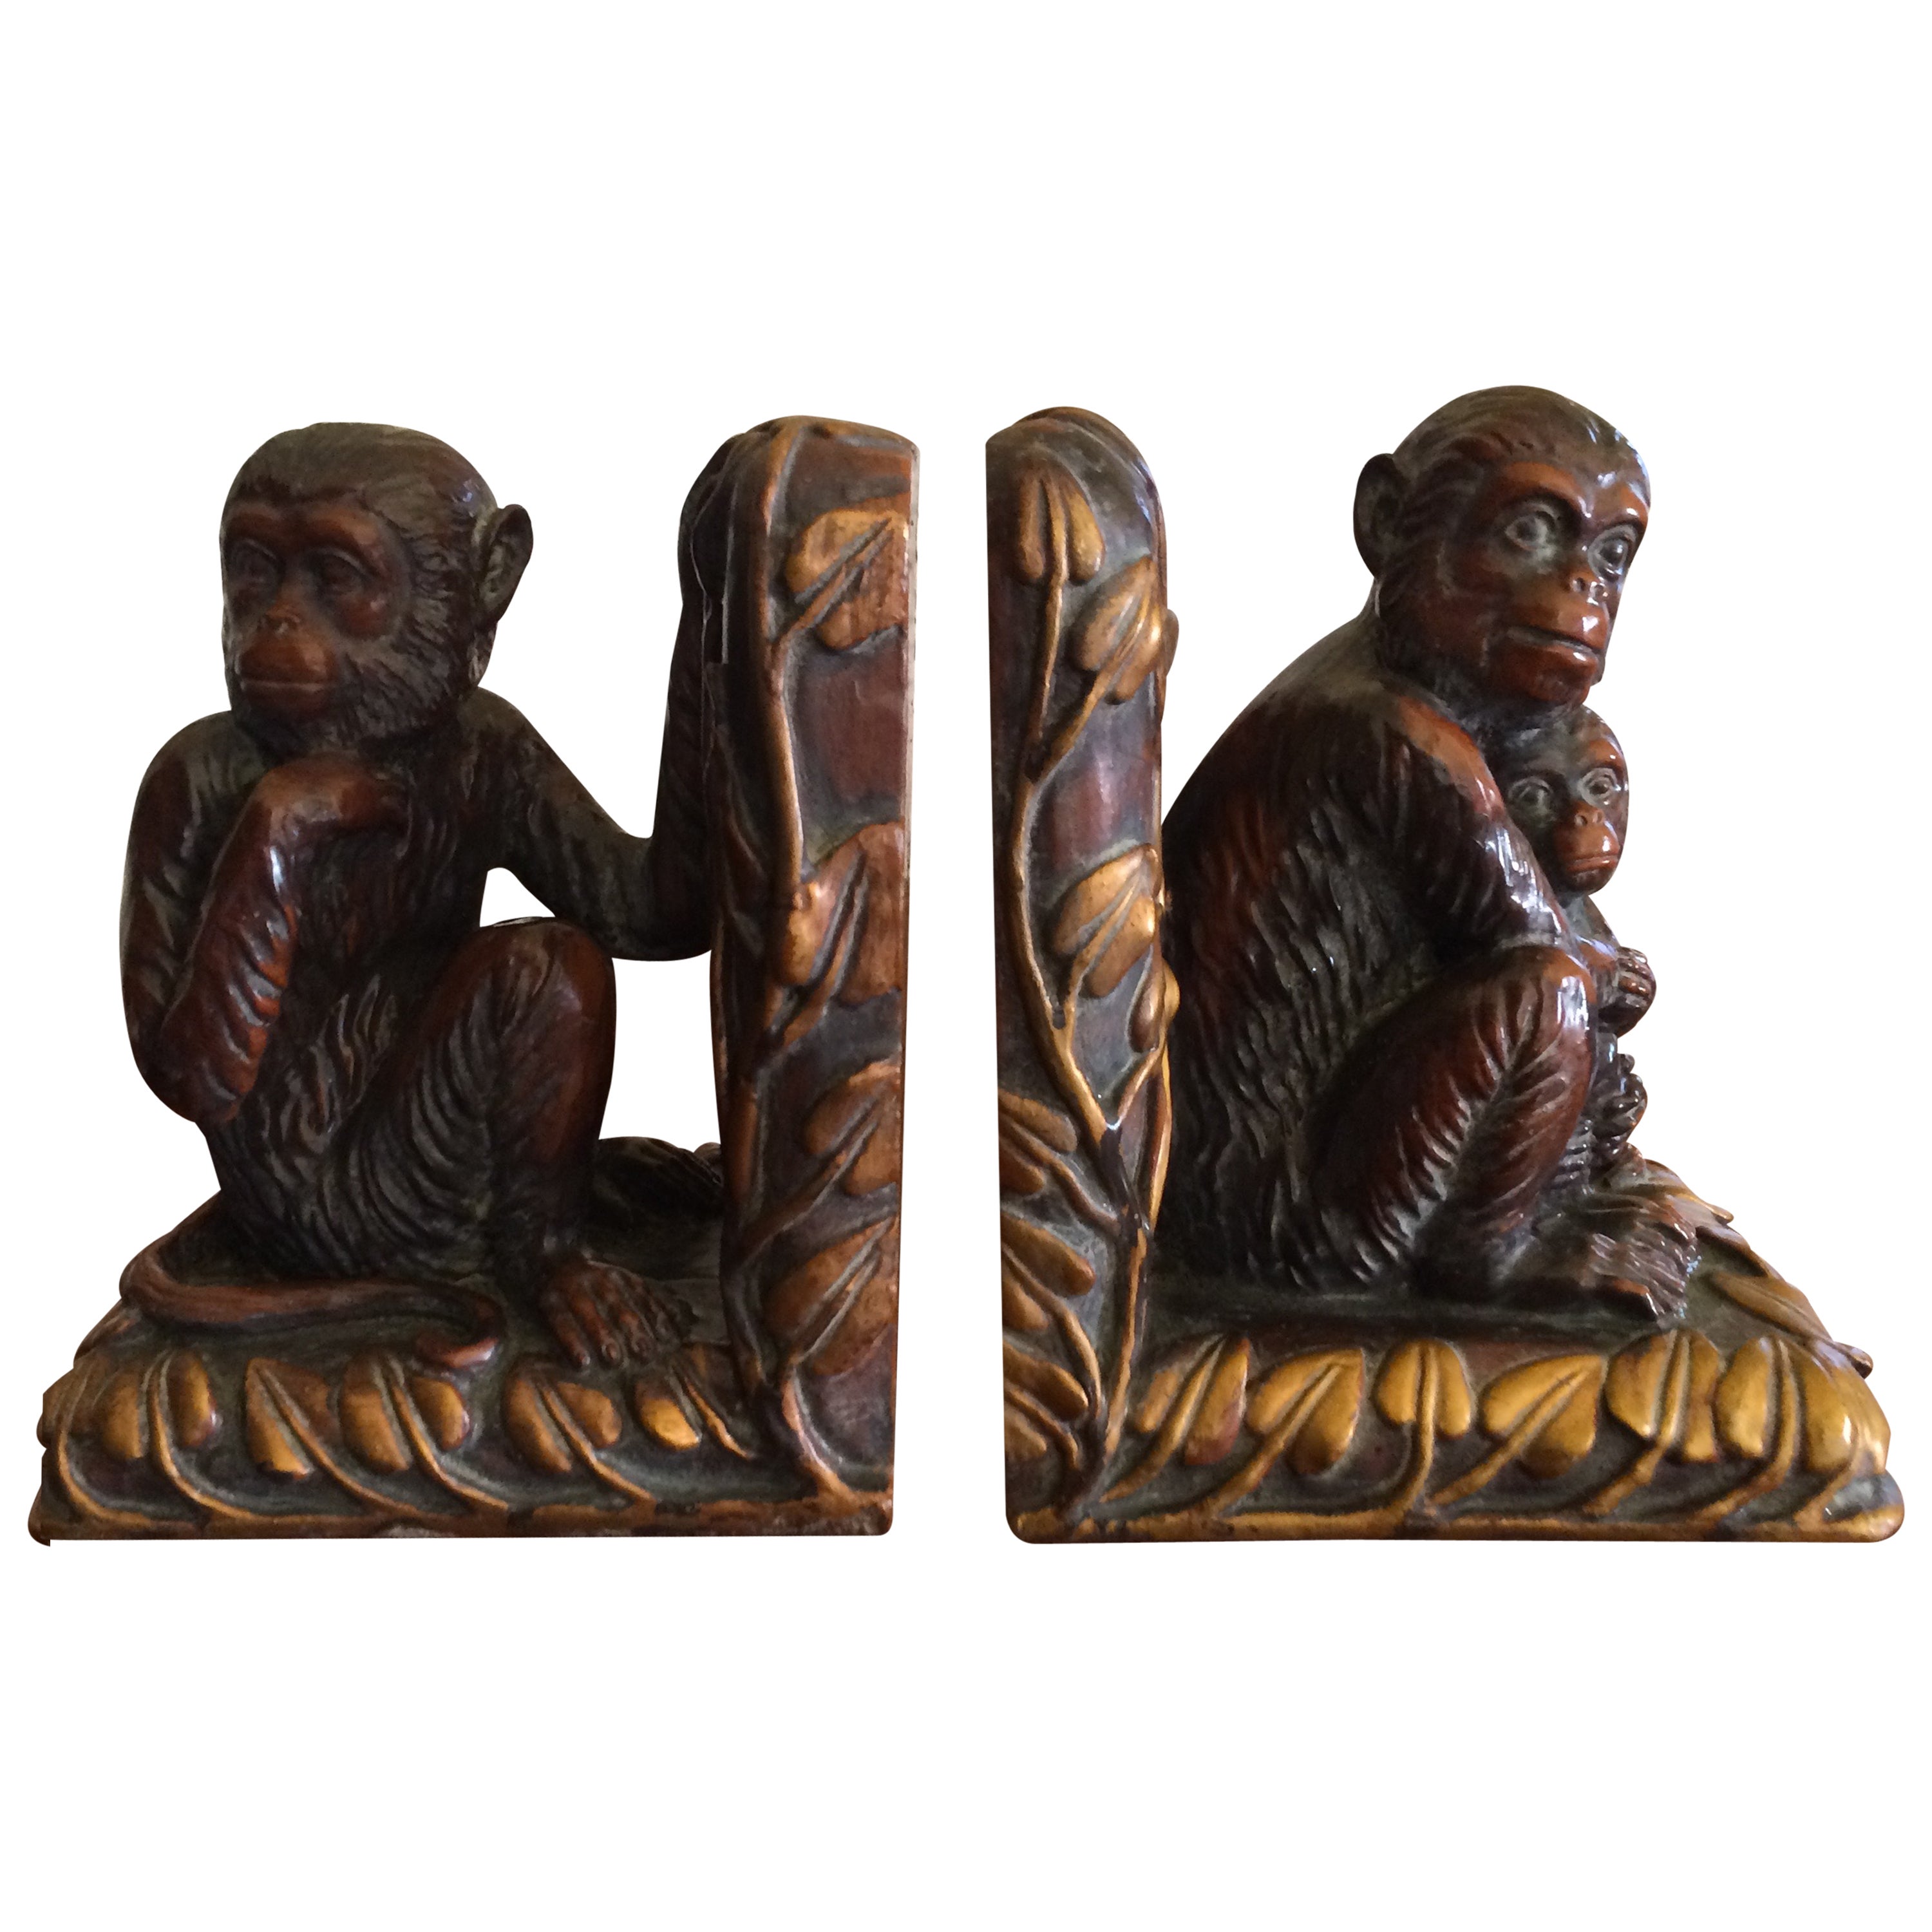 Details about   Home Decor Monkey w/Palm Tree Bookends Book Ends Library Officer Organizer Pair 